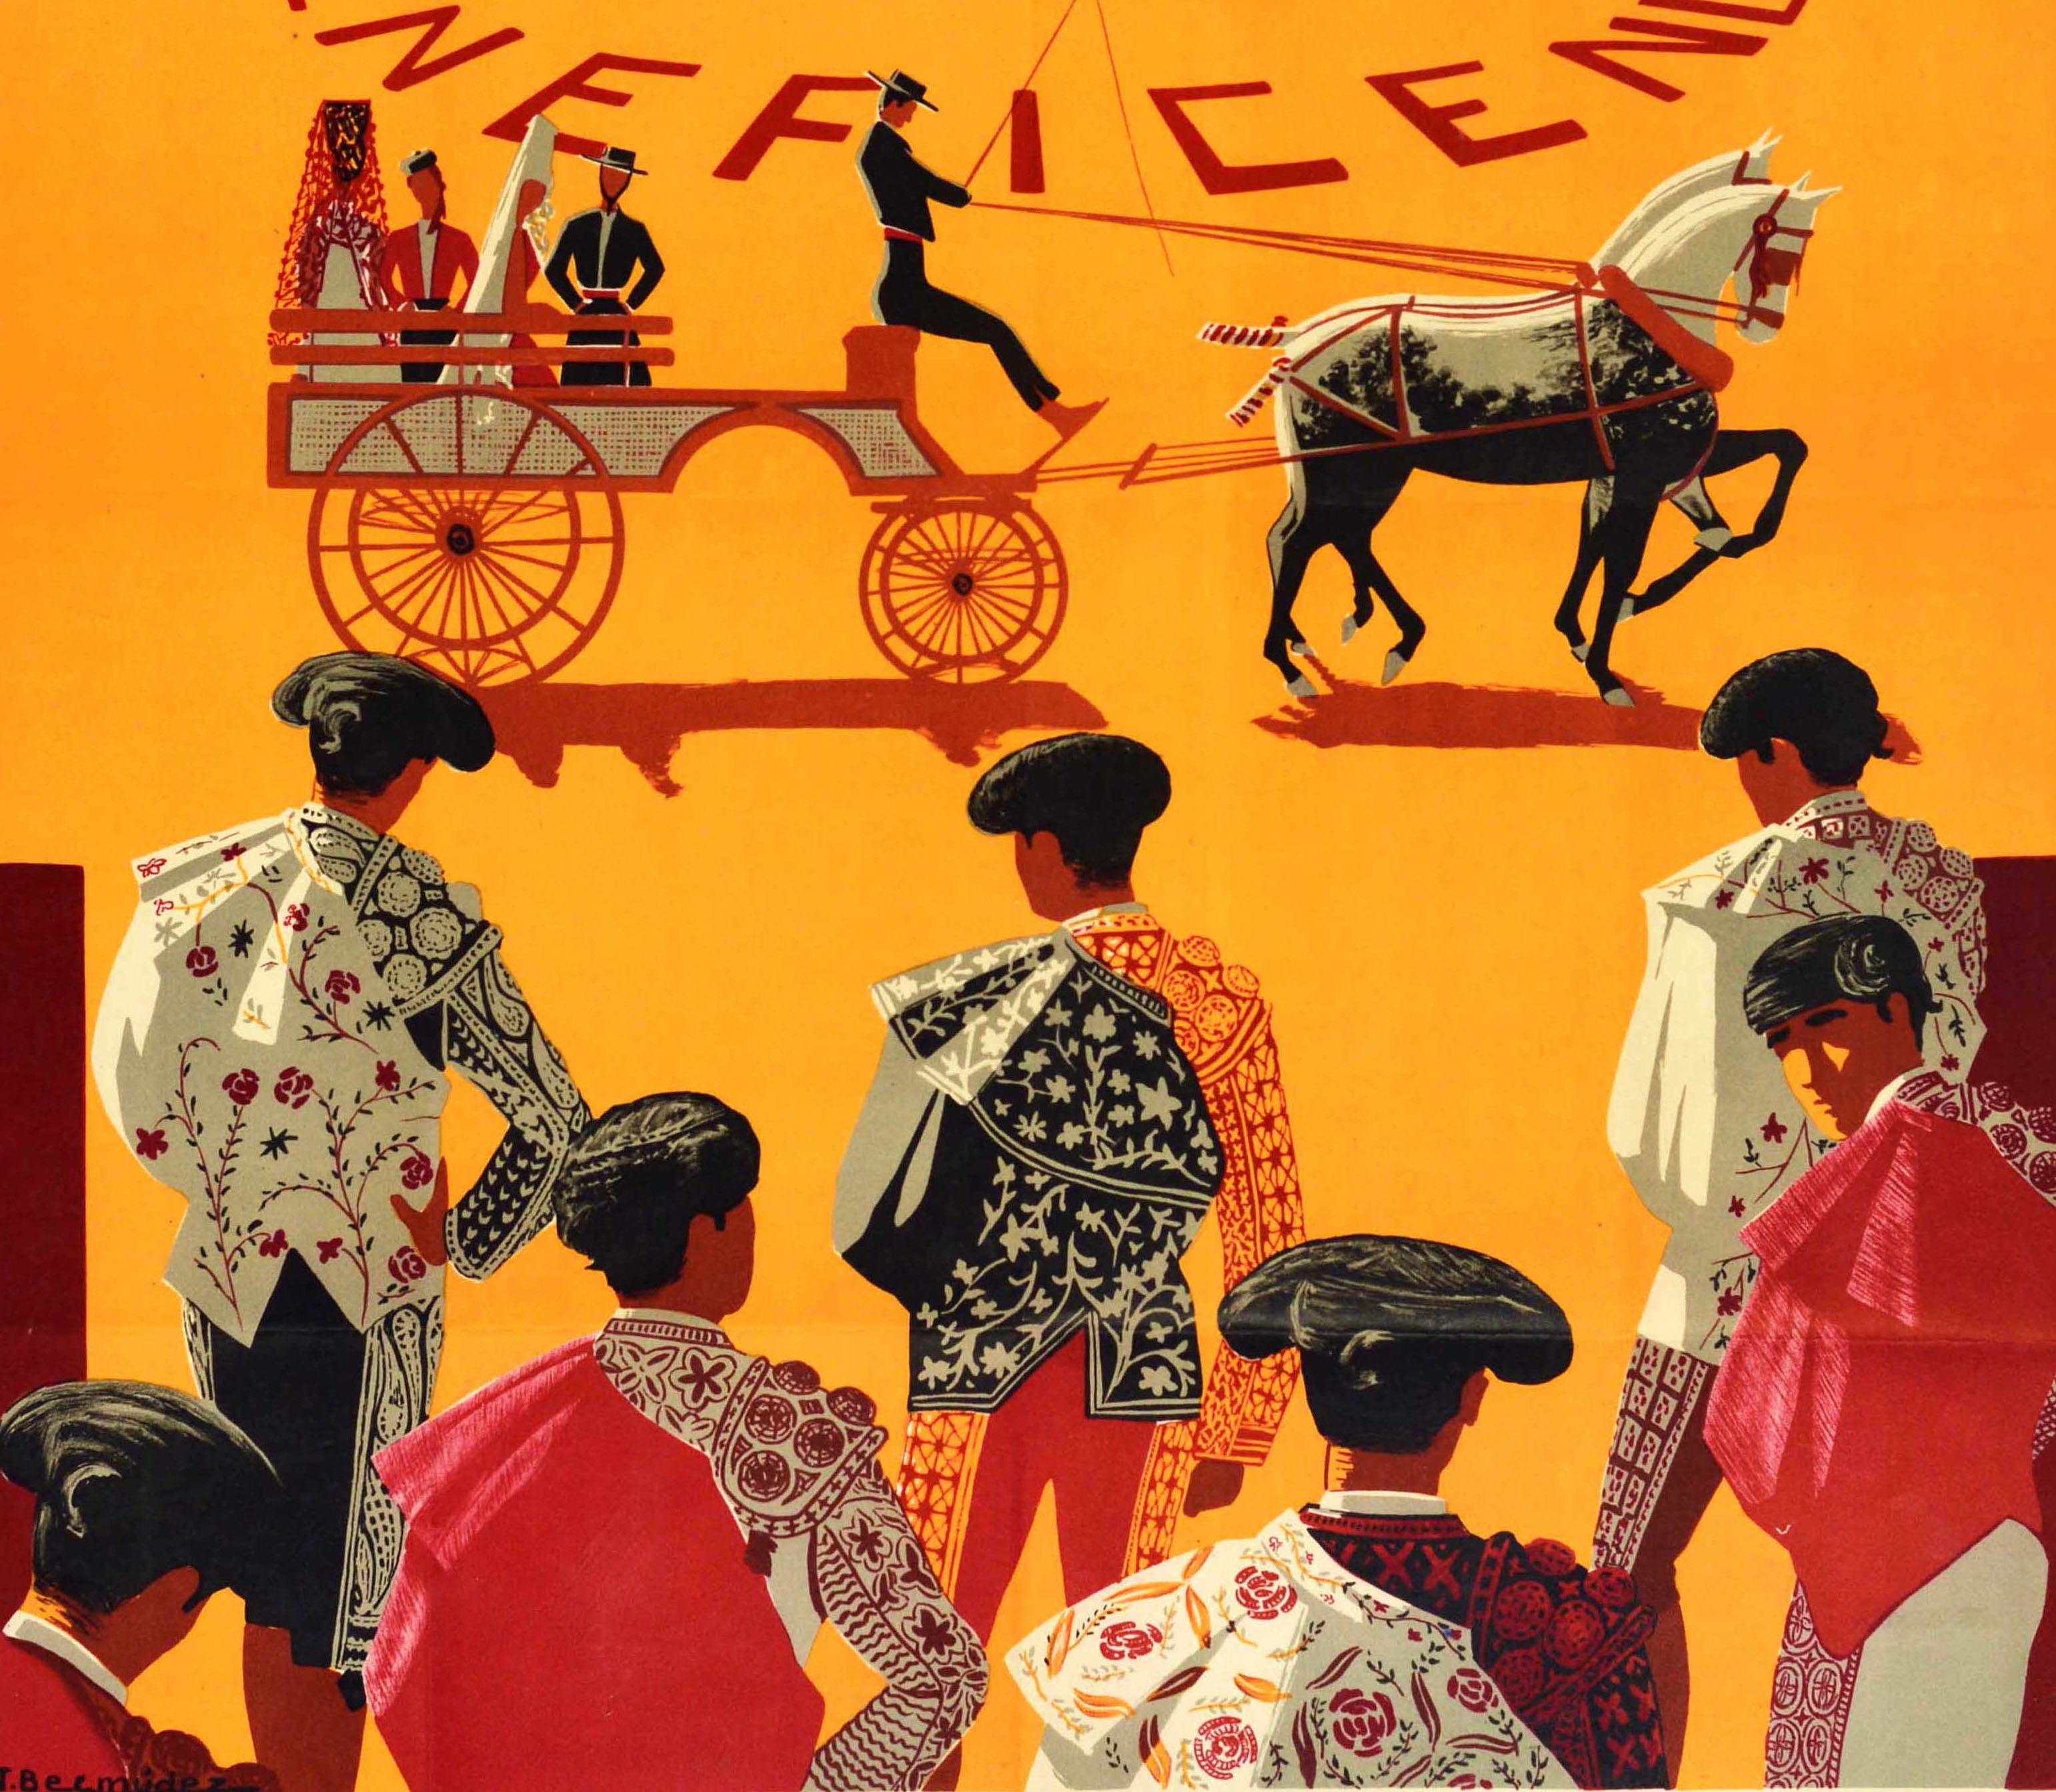 Original vintage travel poster for the Plaza de Toros Ciudad Real Corrida de Beneficencia charity bull run featuring a colourful image of matador bullfighters in ornate floral pattern costumes preparing for the show with people on horse drawn